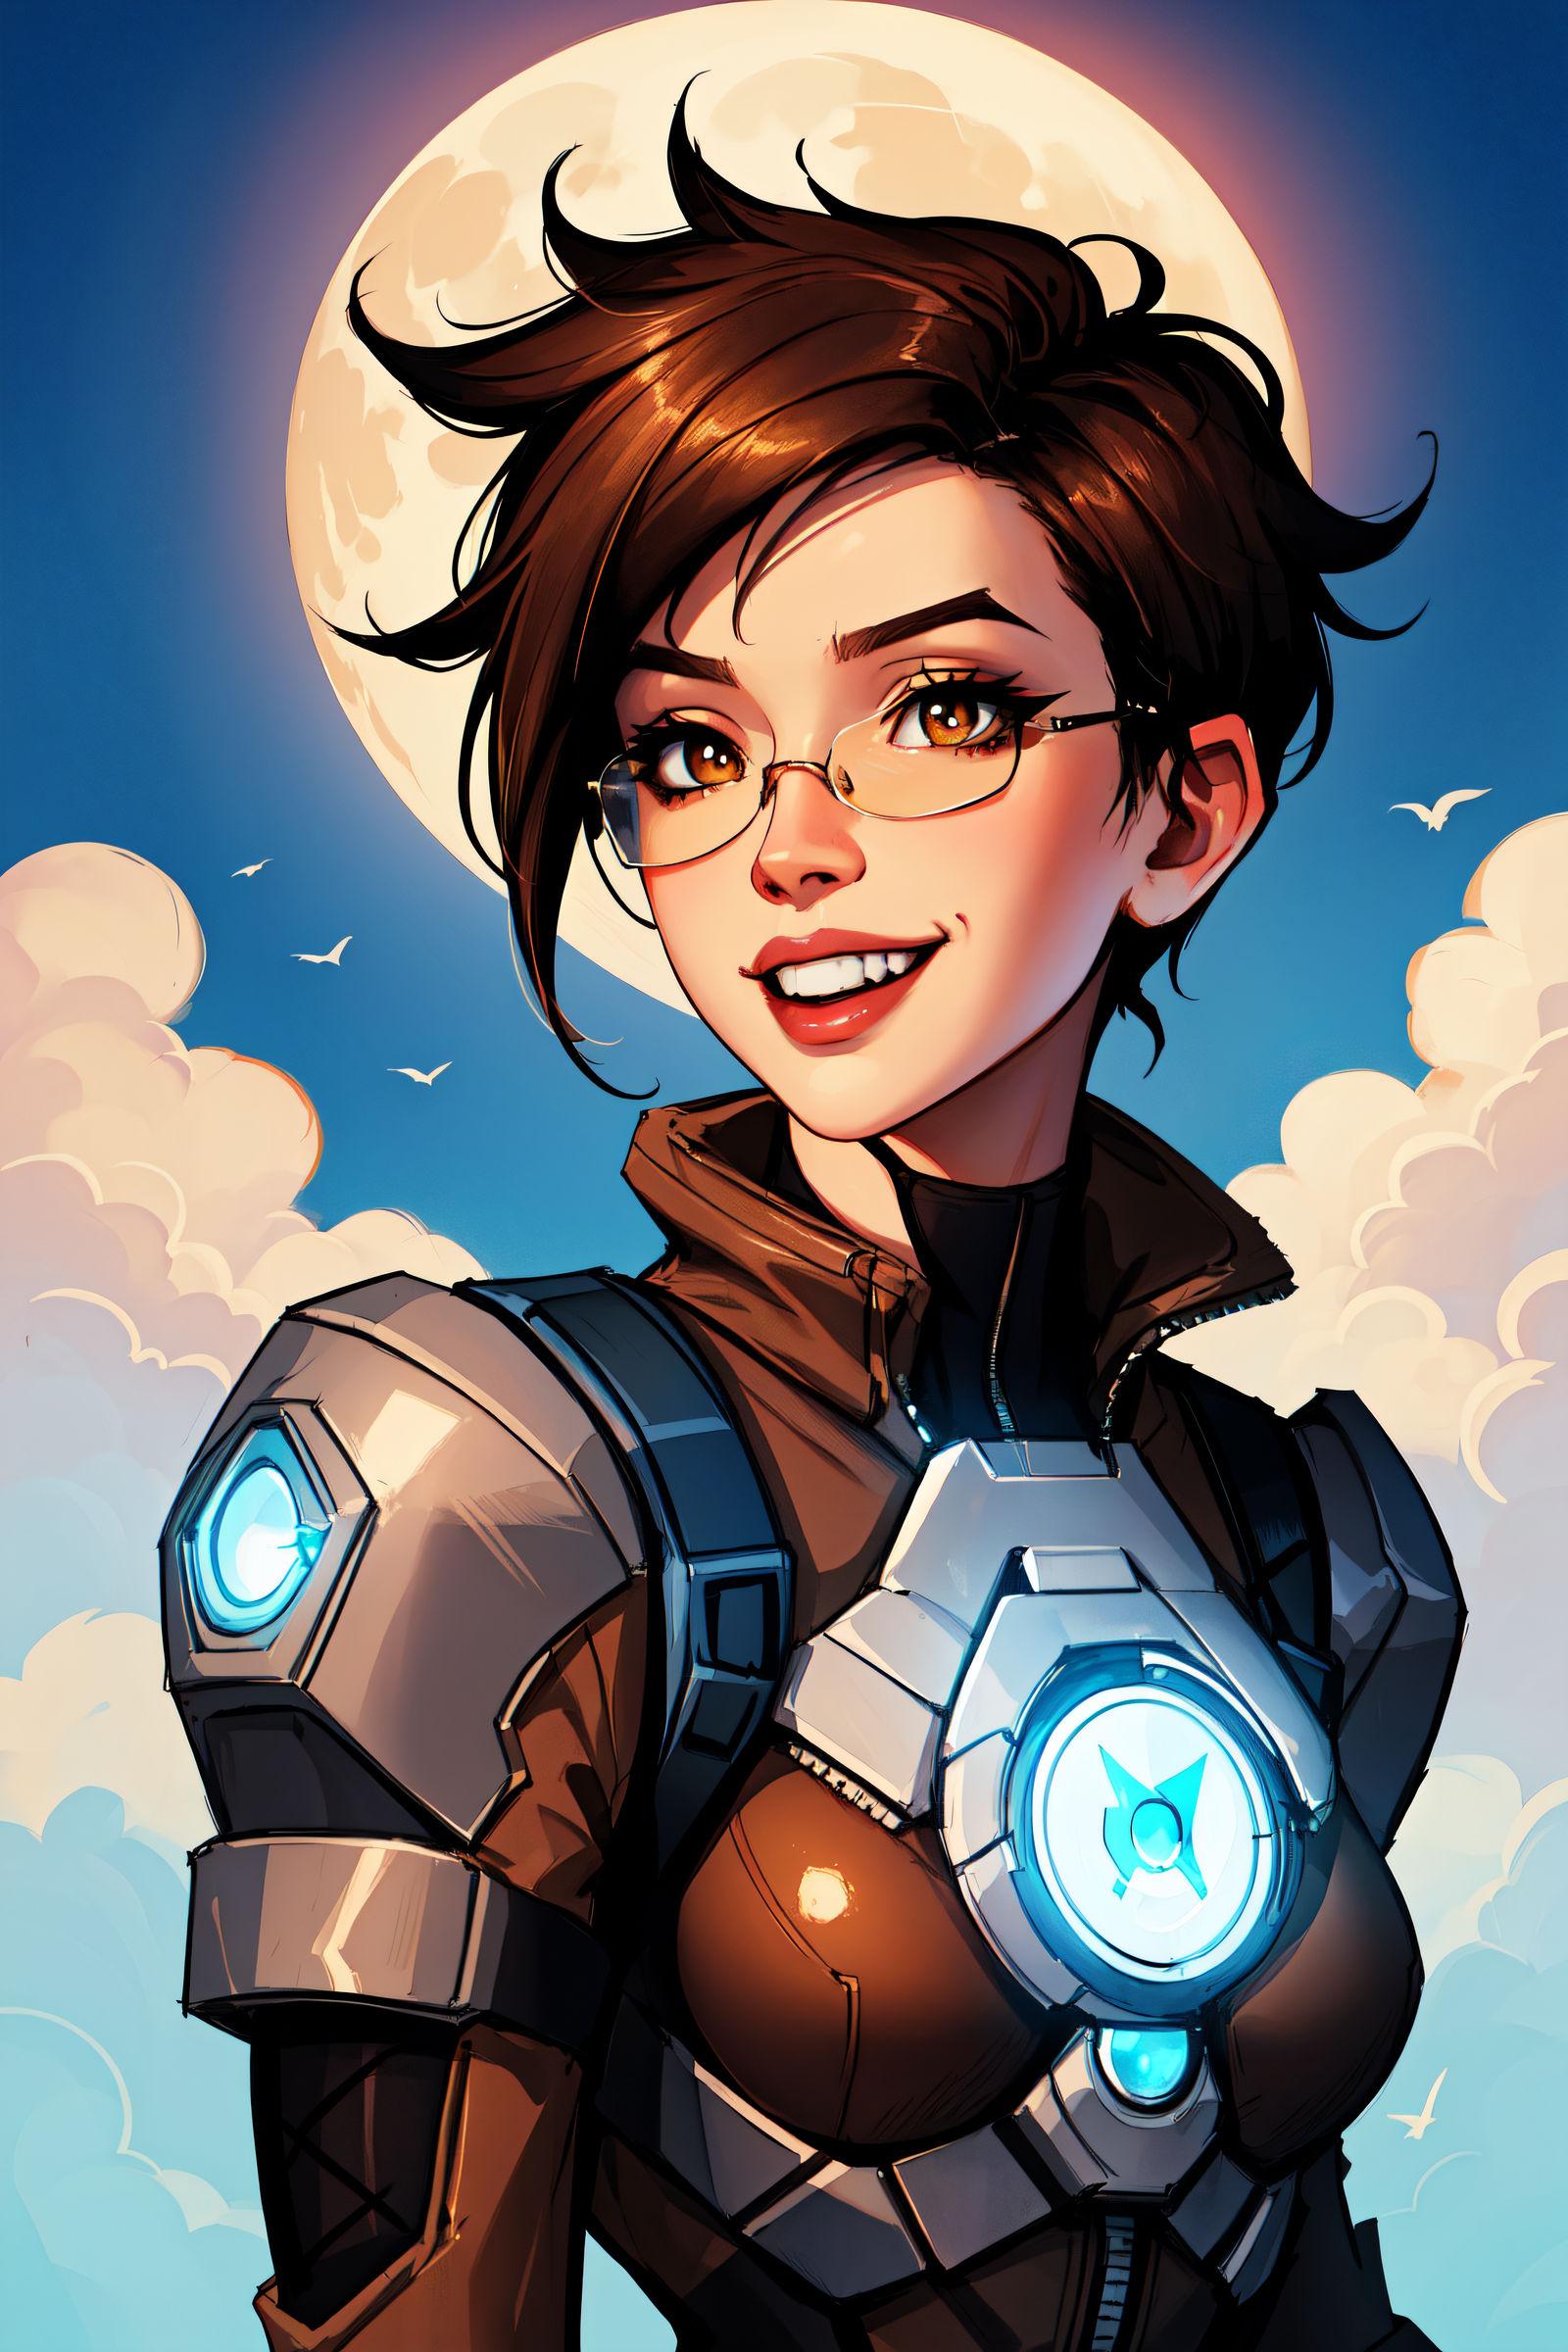 Tracer From Overwatch by Dantegonist on DeviantArt